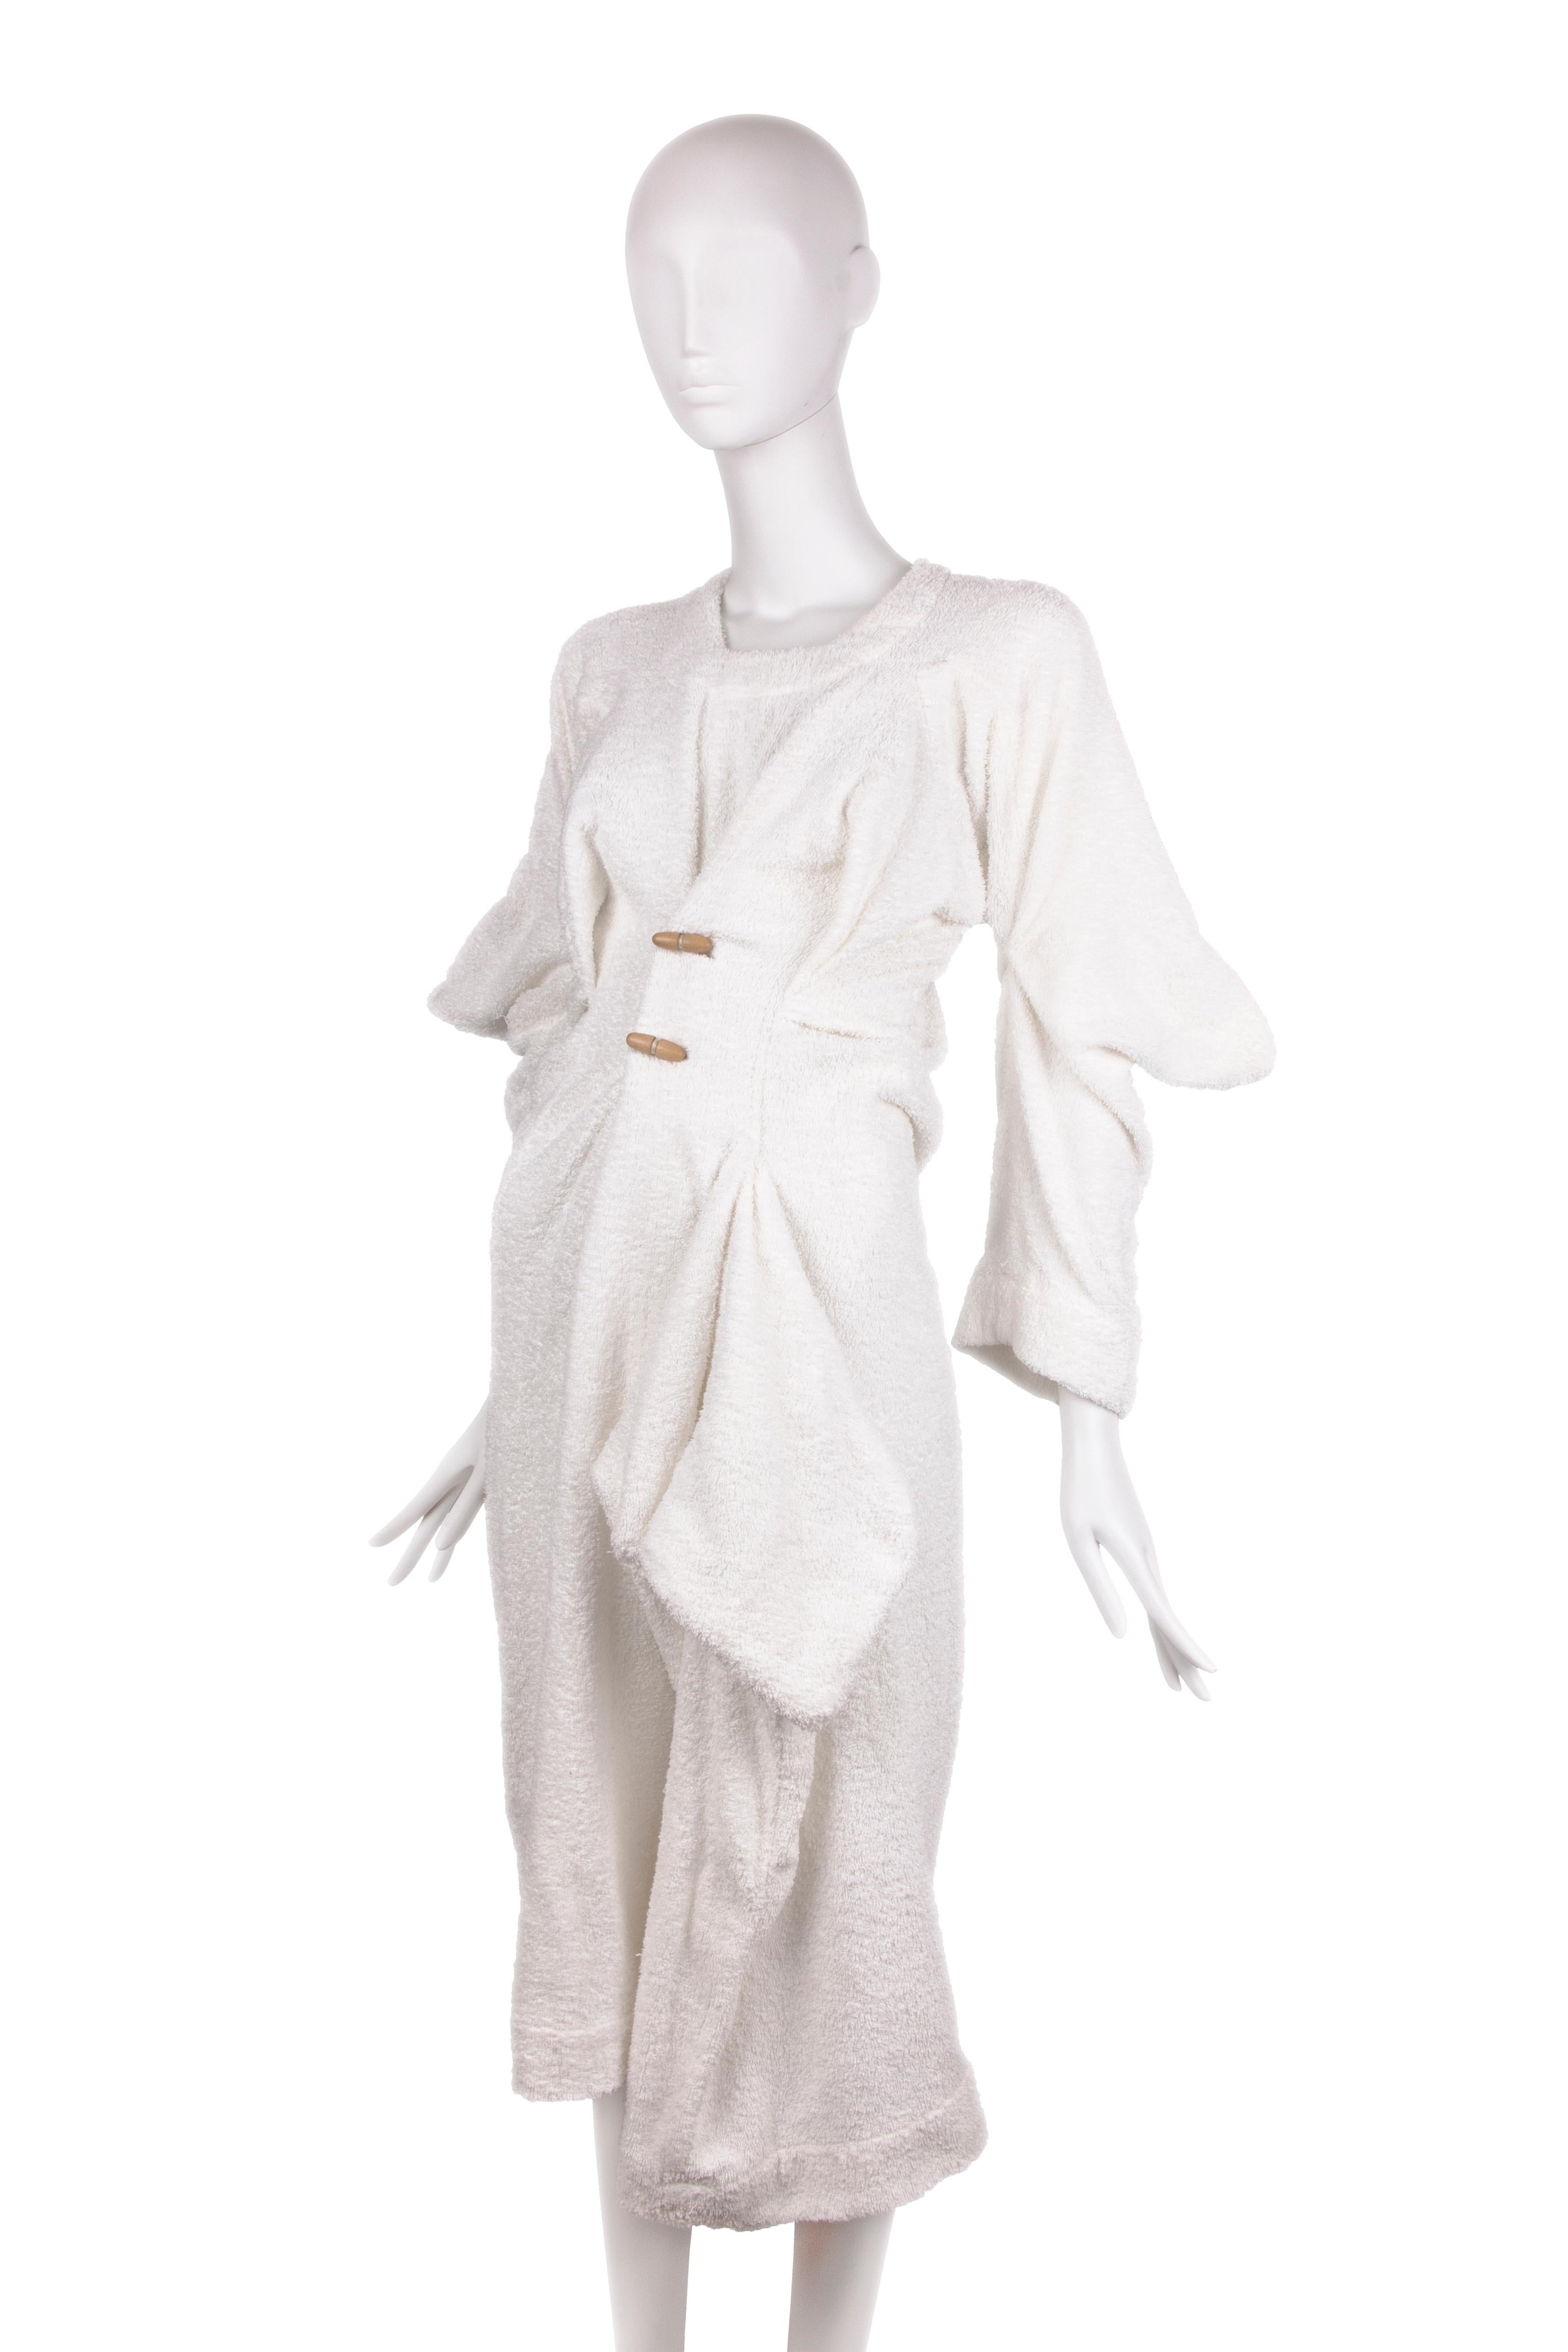 Worlds End by Vivienne Westwood cotton toweling 'Witches' dress, fw 1983 For Sale 1